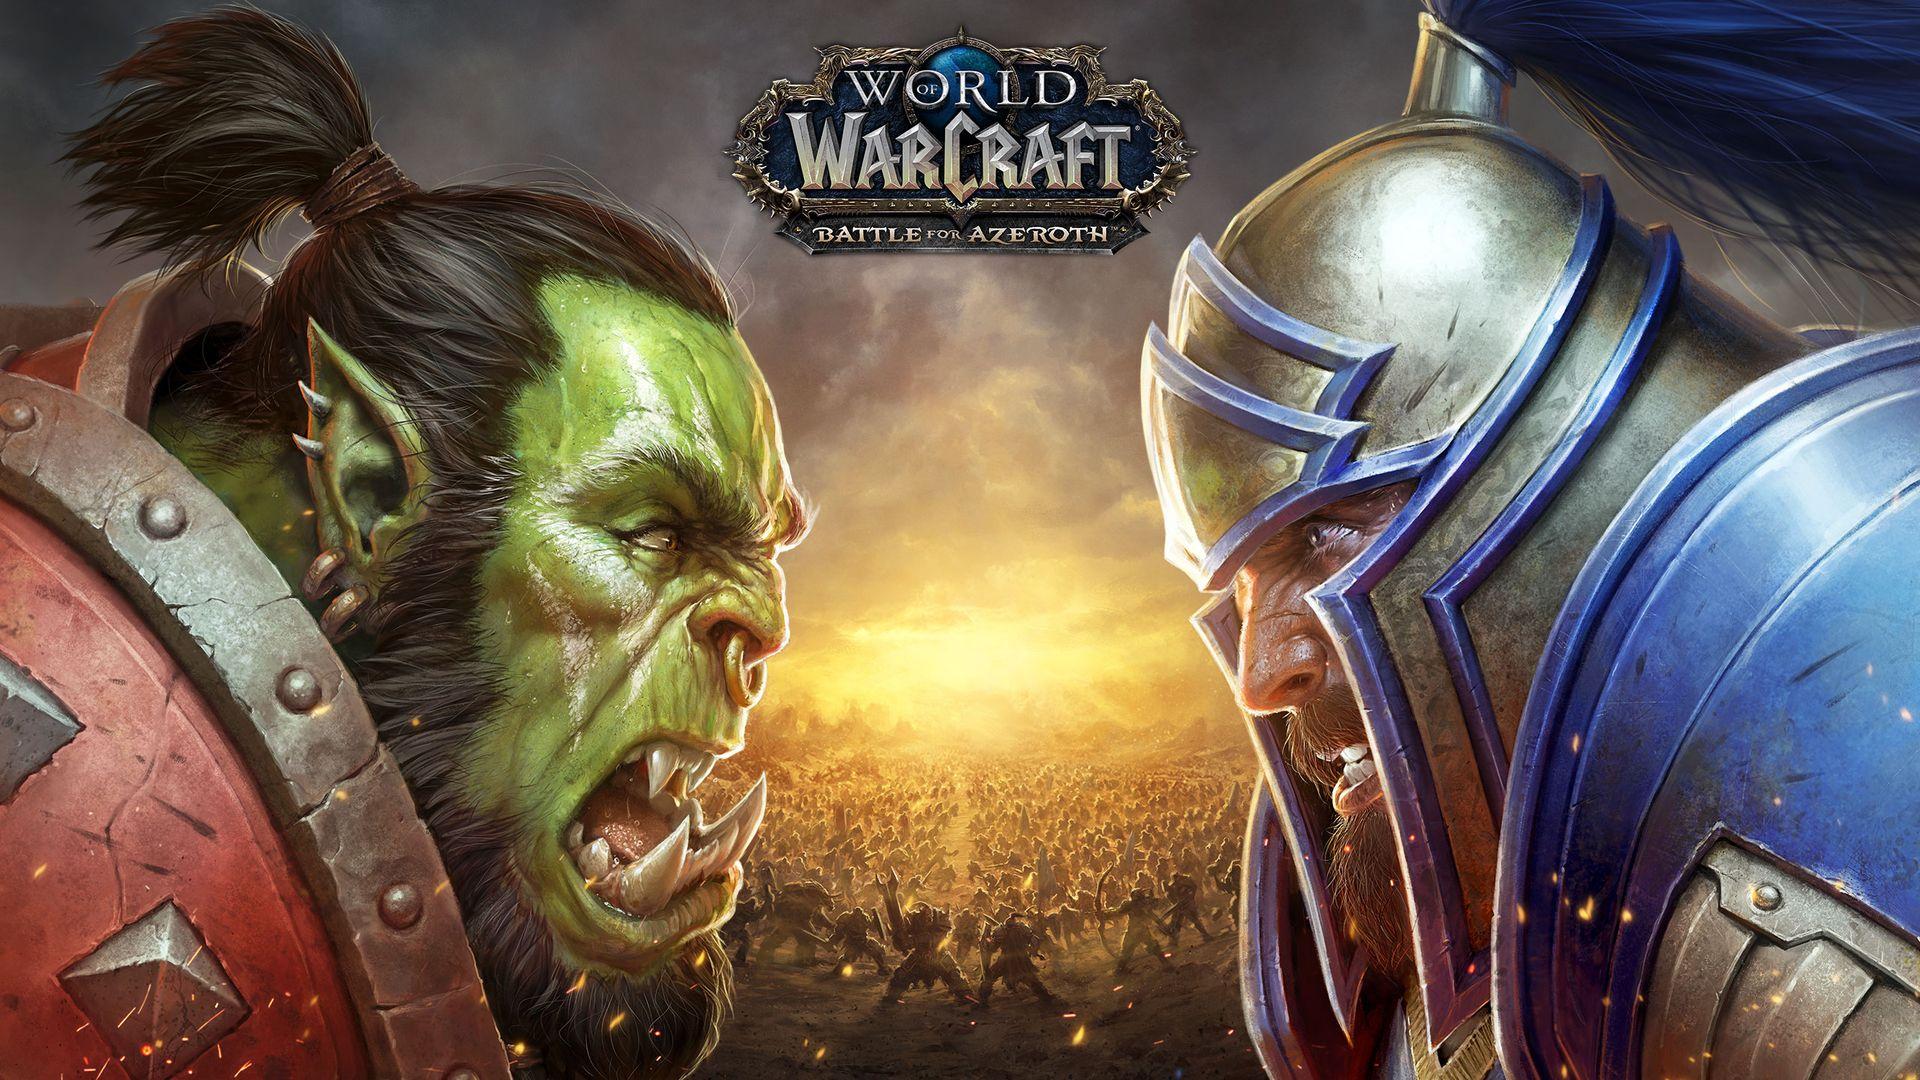 Battle For Azeroth. Wallpaper from World of Warcraft: Battle